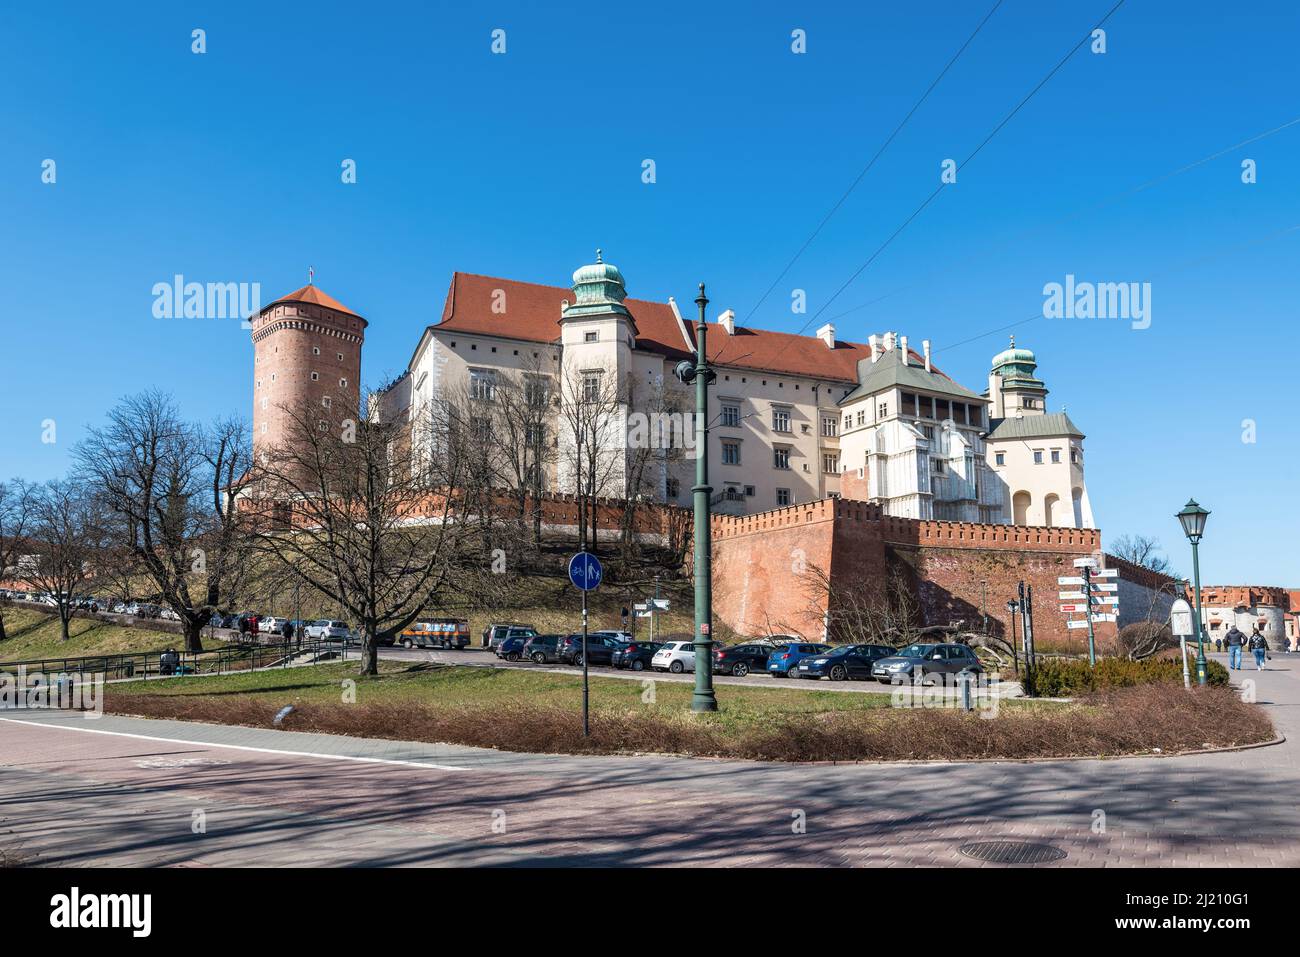 Krakow, Poland - March 11, 2022: View to medieval Wawel Royal Castle, the first UNESCO World Heritage Site in the world. Stock Photo